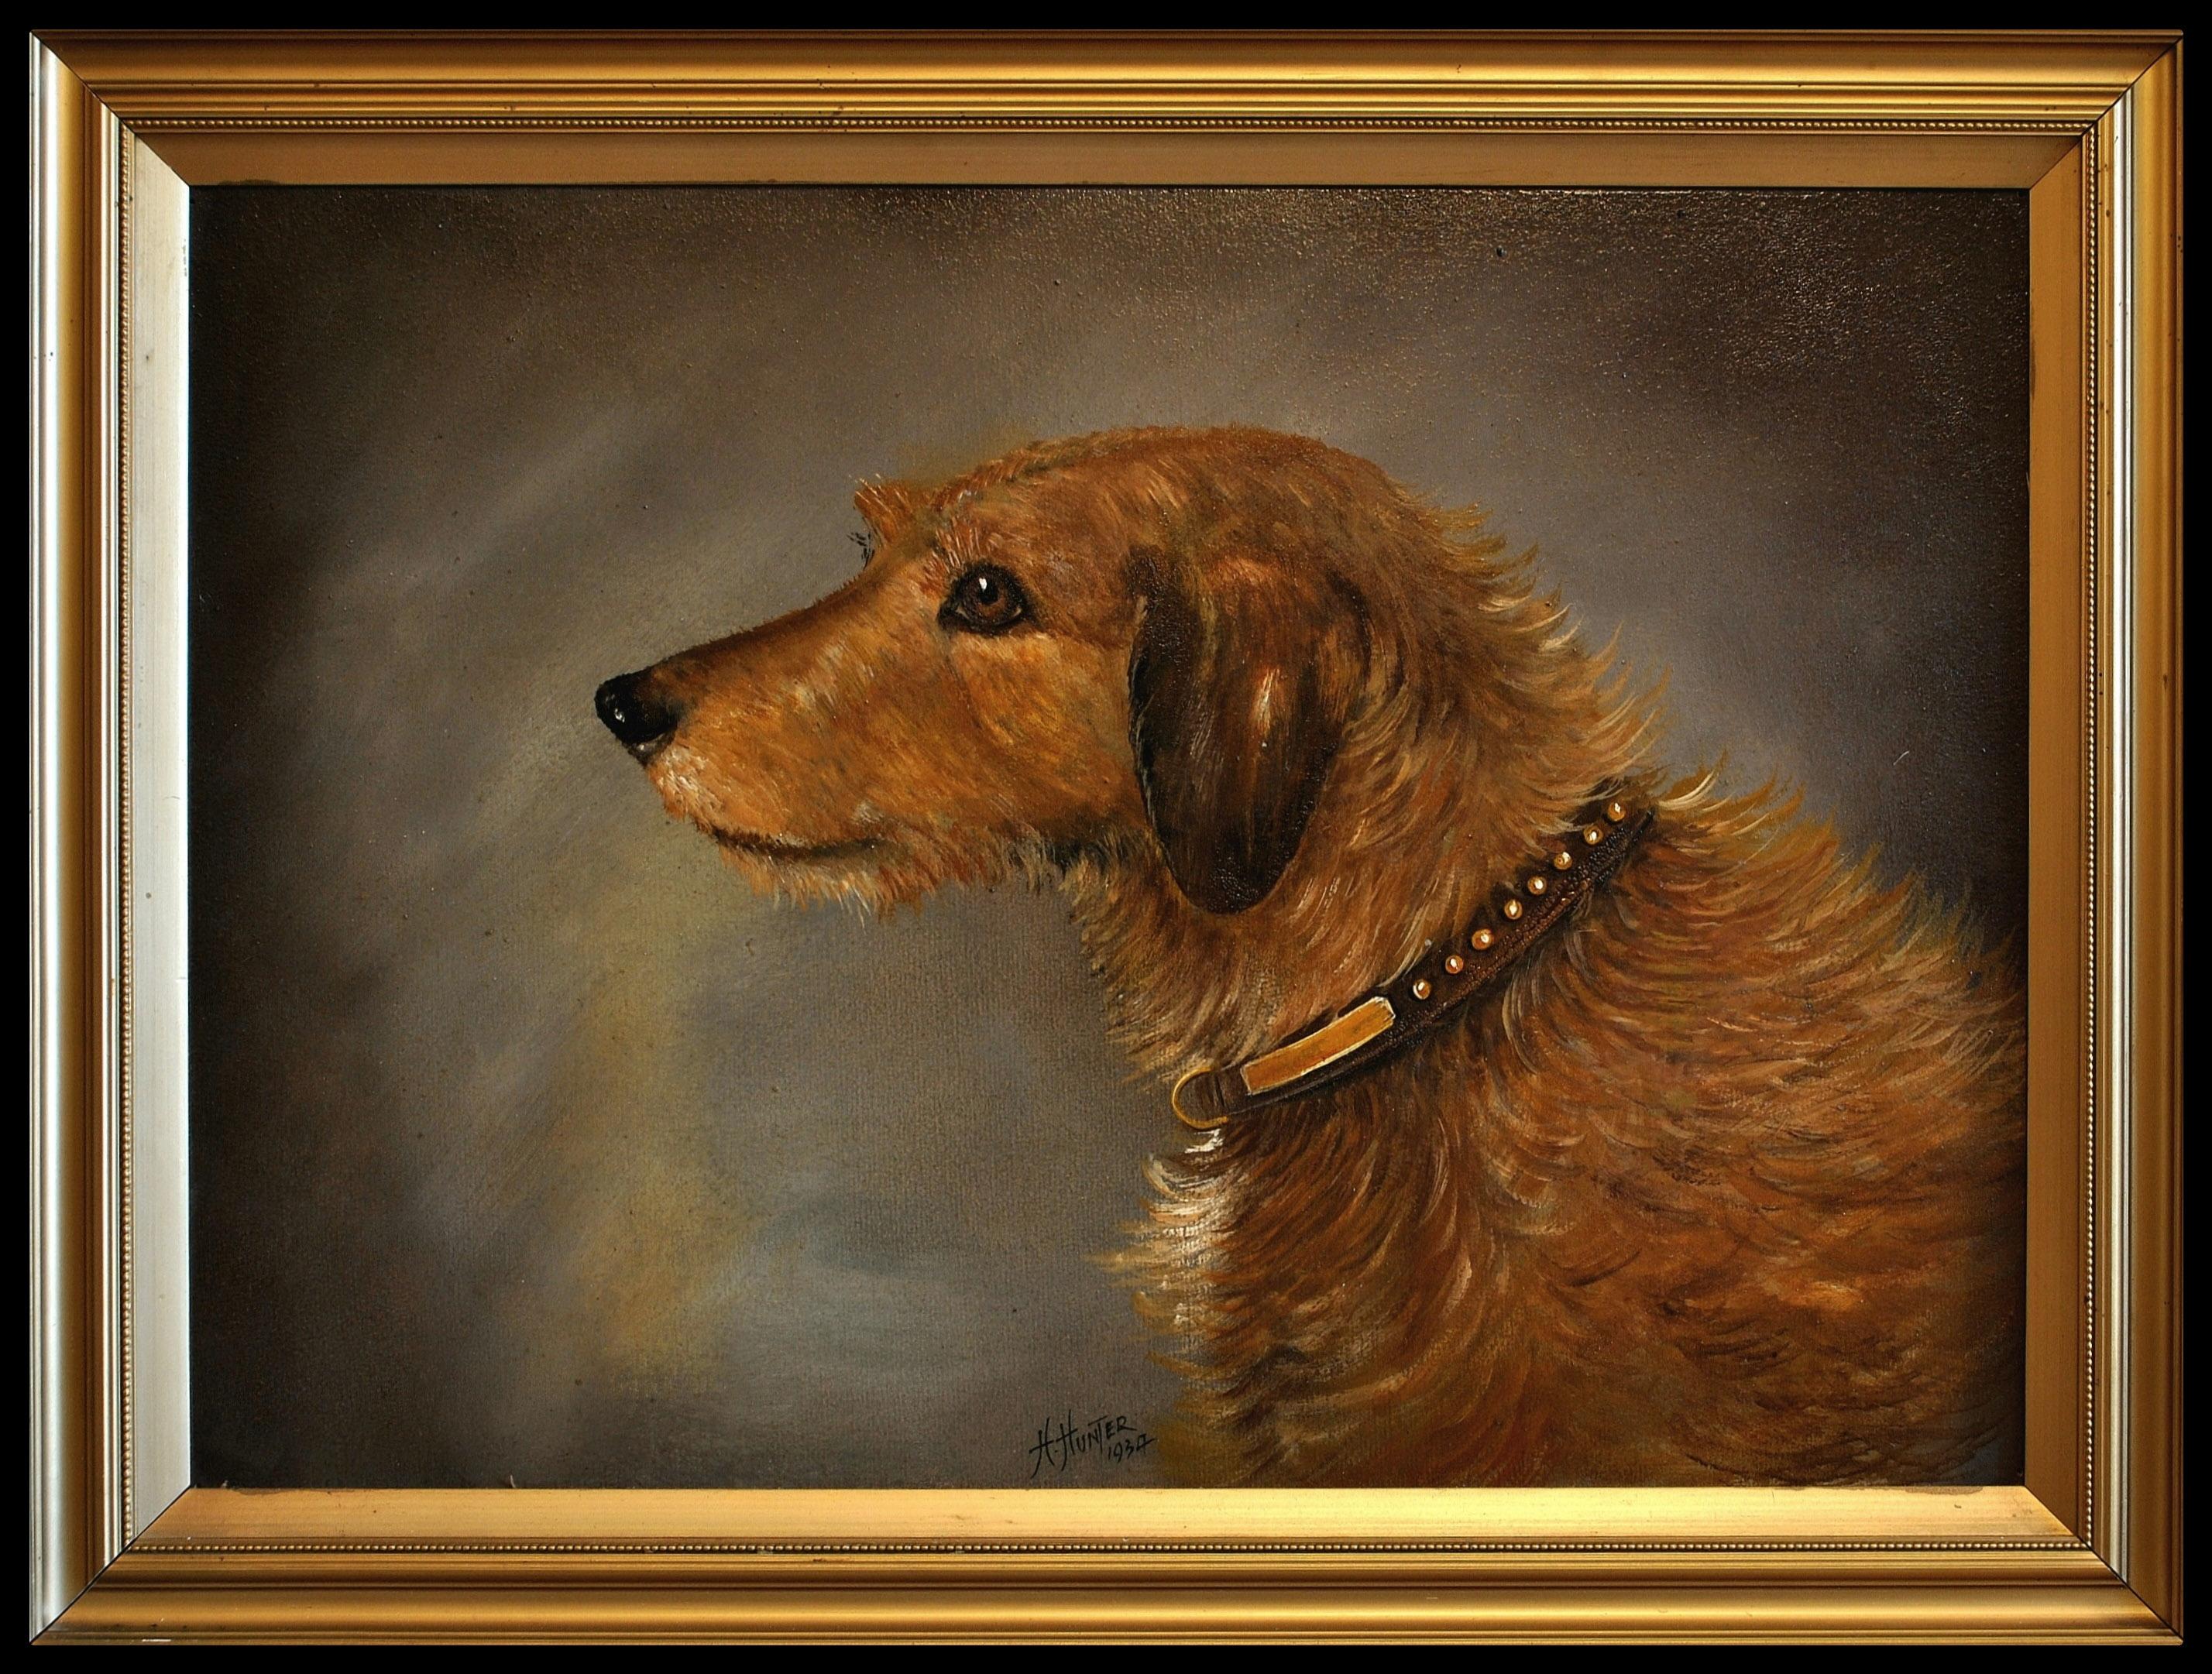 H. Hunter Animal Painting - Portrait of a Terrier - Early 20th Century Antique Oil on Board Dog Painting